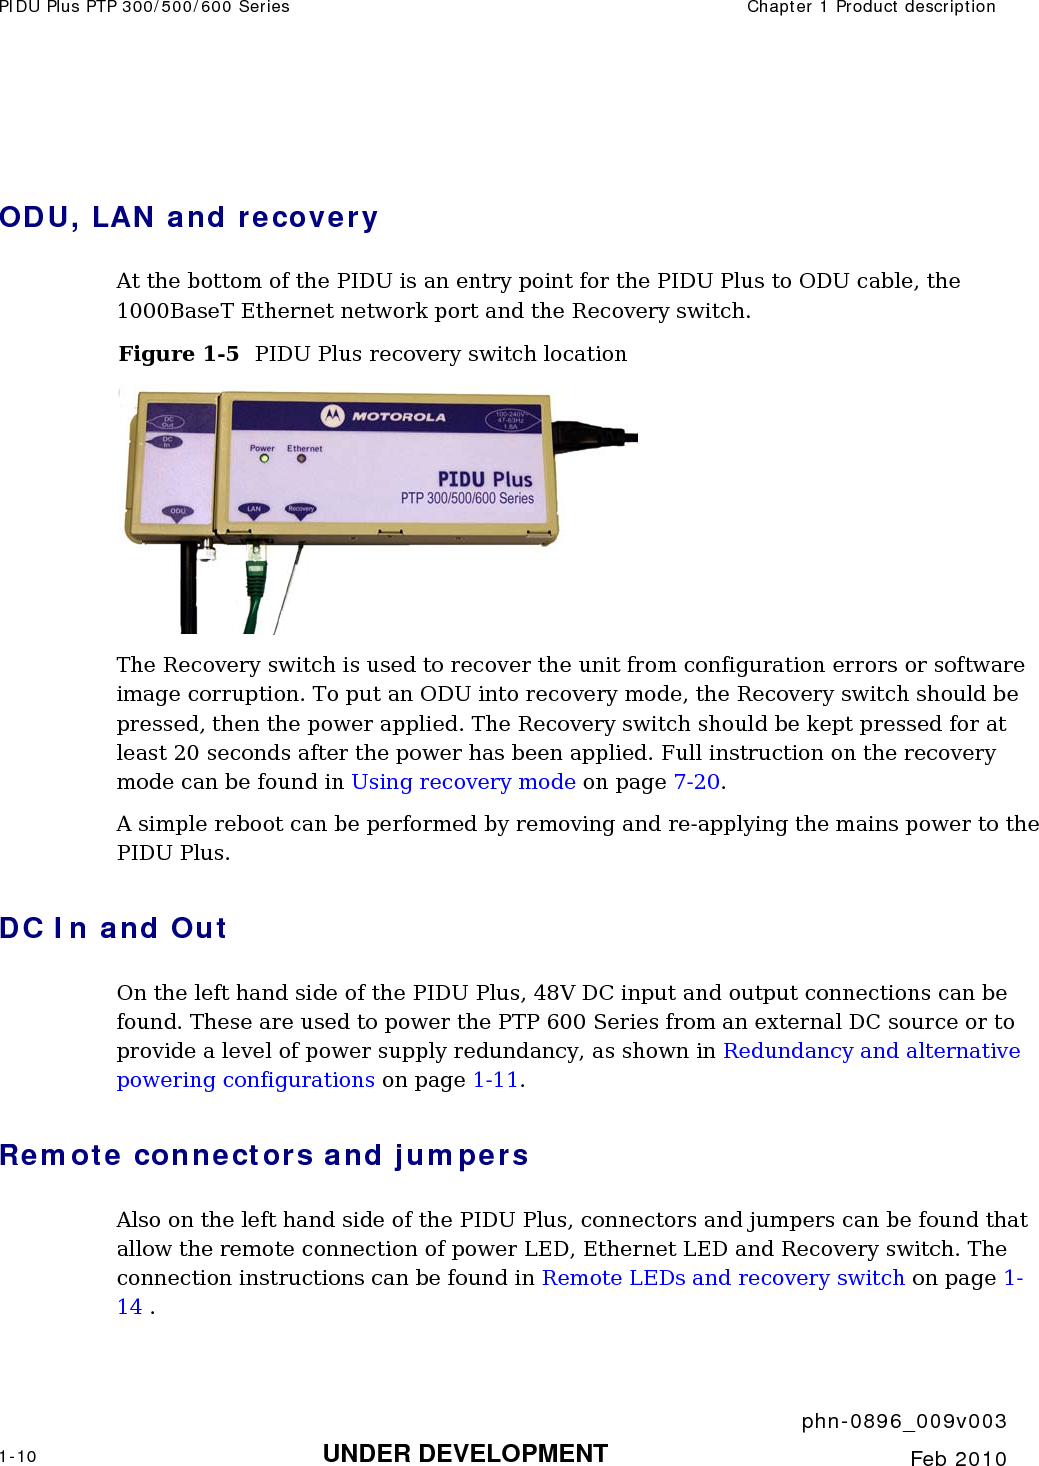 PIDU Plus PTP 300/500/600 Series  Chapter 1 Product description     phn-0896_009v003 1-10 UNDER DEVELOPMENT  Feb 2010   ODU, LAN and recovery At the bottom of the PIDU is an entry point for the PIDU Plus to ODU cable, the 1000BaseT Ethernet network port and the Recovery switch. Figure 1-5  PIDU Plus recovery switch location  The Recovery switch is used to recover the unit from configuration errors or software image corruption. To put an ODU into recovery mode, the Recovery switch should be pressed, then the power applied. The Recovery switch should be kept pressed for at least 20 seconds after the power has been applied. Full instruction on the recovery mode can be found in Using recovery mode on page 7-20. A simple reboot can be performed by removing and re-applying the mains power to the PIDU Plus. DC In and Out On the left hand side of the PIDU Plus, 48V DC input and output connections can be found. These are used to power the PTP 600 Series from an external DC source or to provide a level of power supply redundancy, as shown in Redundancy and alternative powering configurations on page 1-11. Remote connectors and jumpers Also on the left hand side of the PIDU Plus, connectors and jumpers can be found that allow the remote connection of power LED, Ethernet LED and Recovery switch. The connection instructions can be found in Remote LEDs and recovery switch on page 1-14 .  